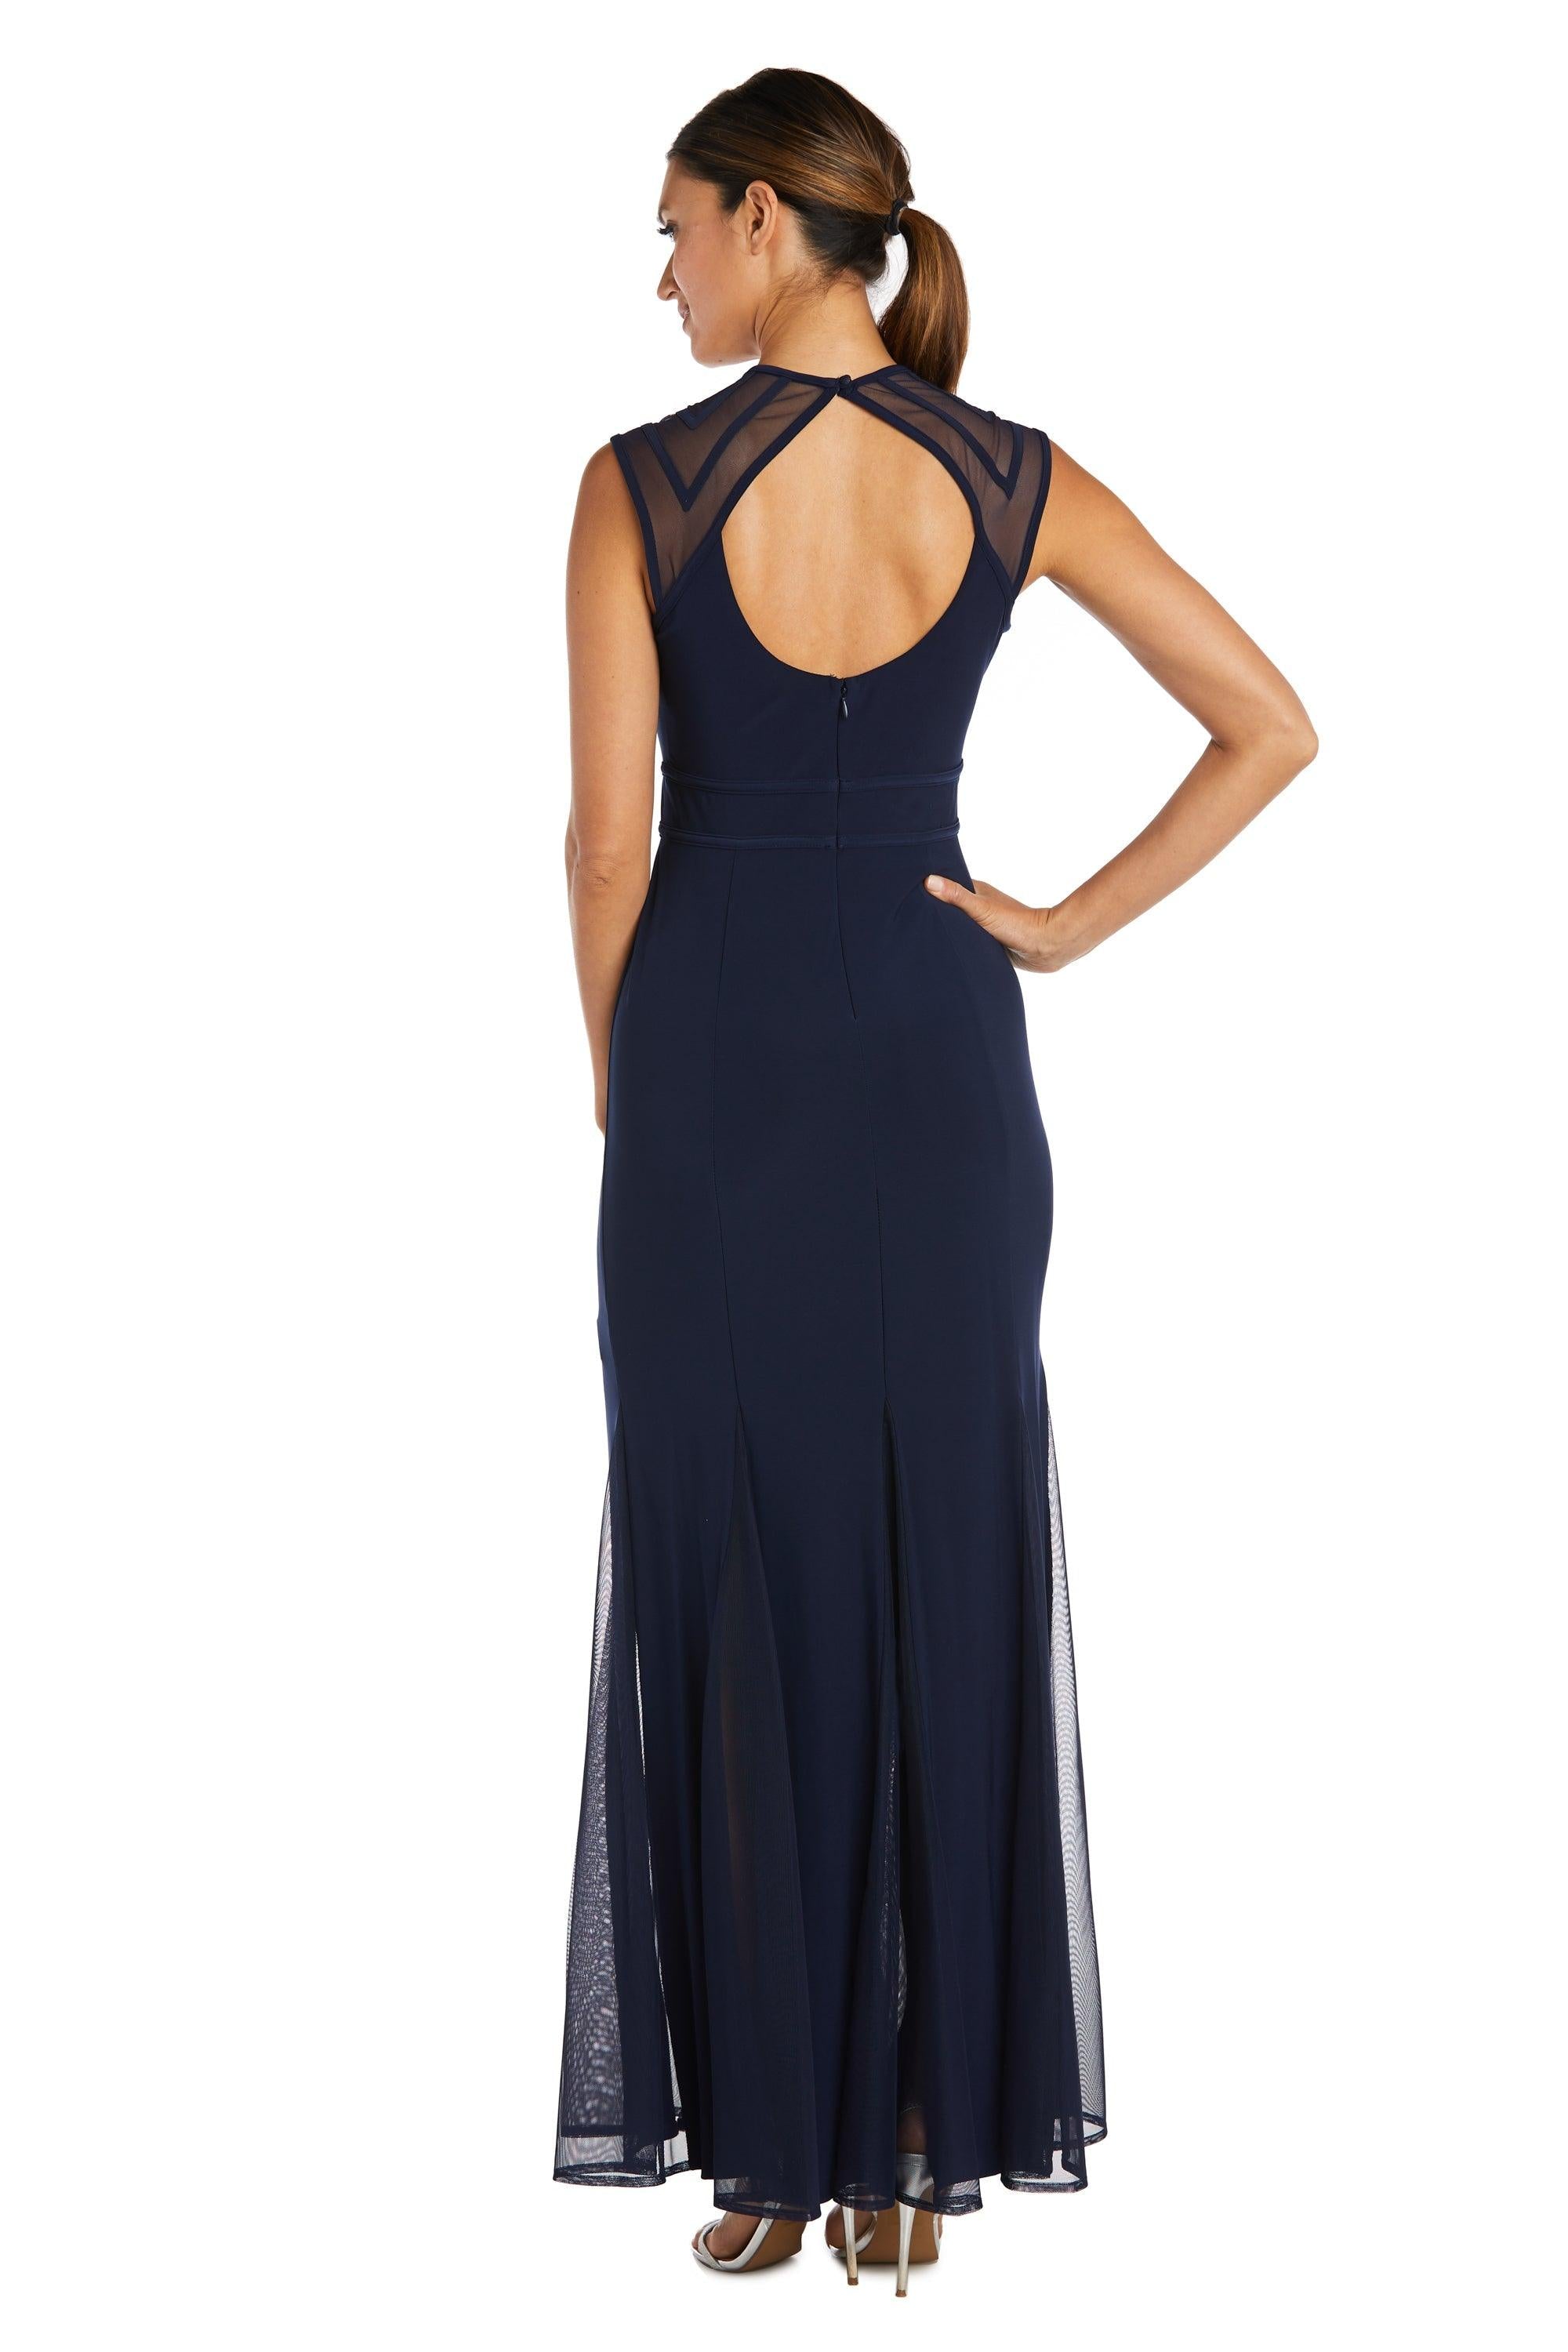 Nightway Long Formal Petite Evening Dress 21566P - The Dress Outlet